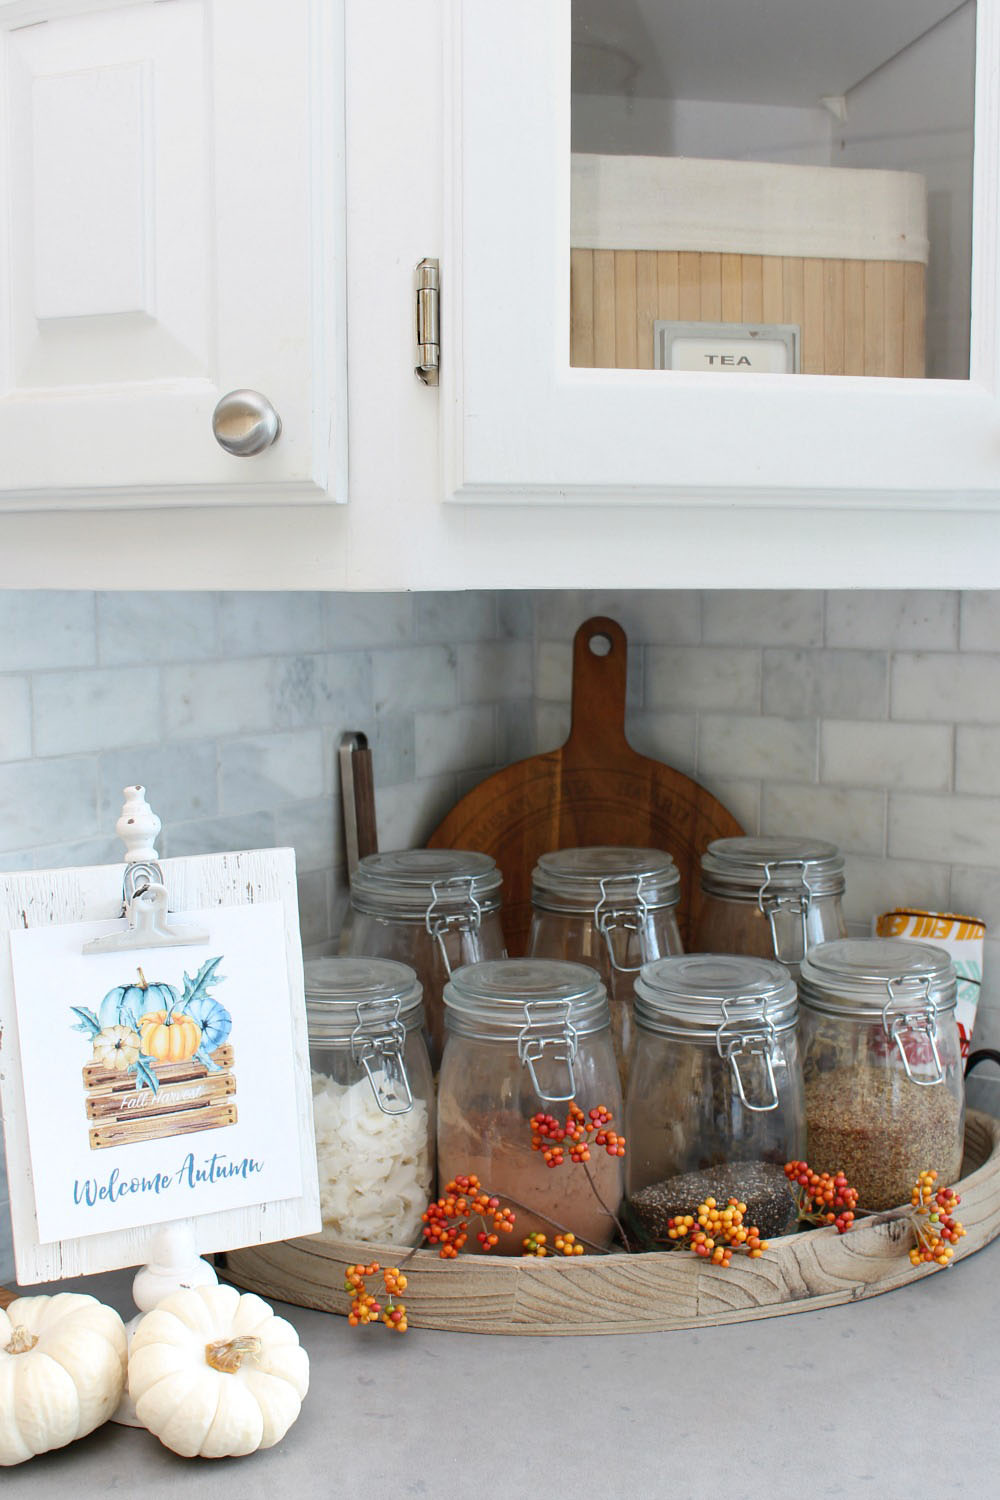 Cute fall decor ideas for the kitchen and dining room.